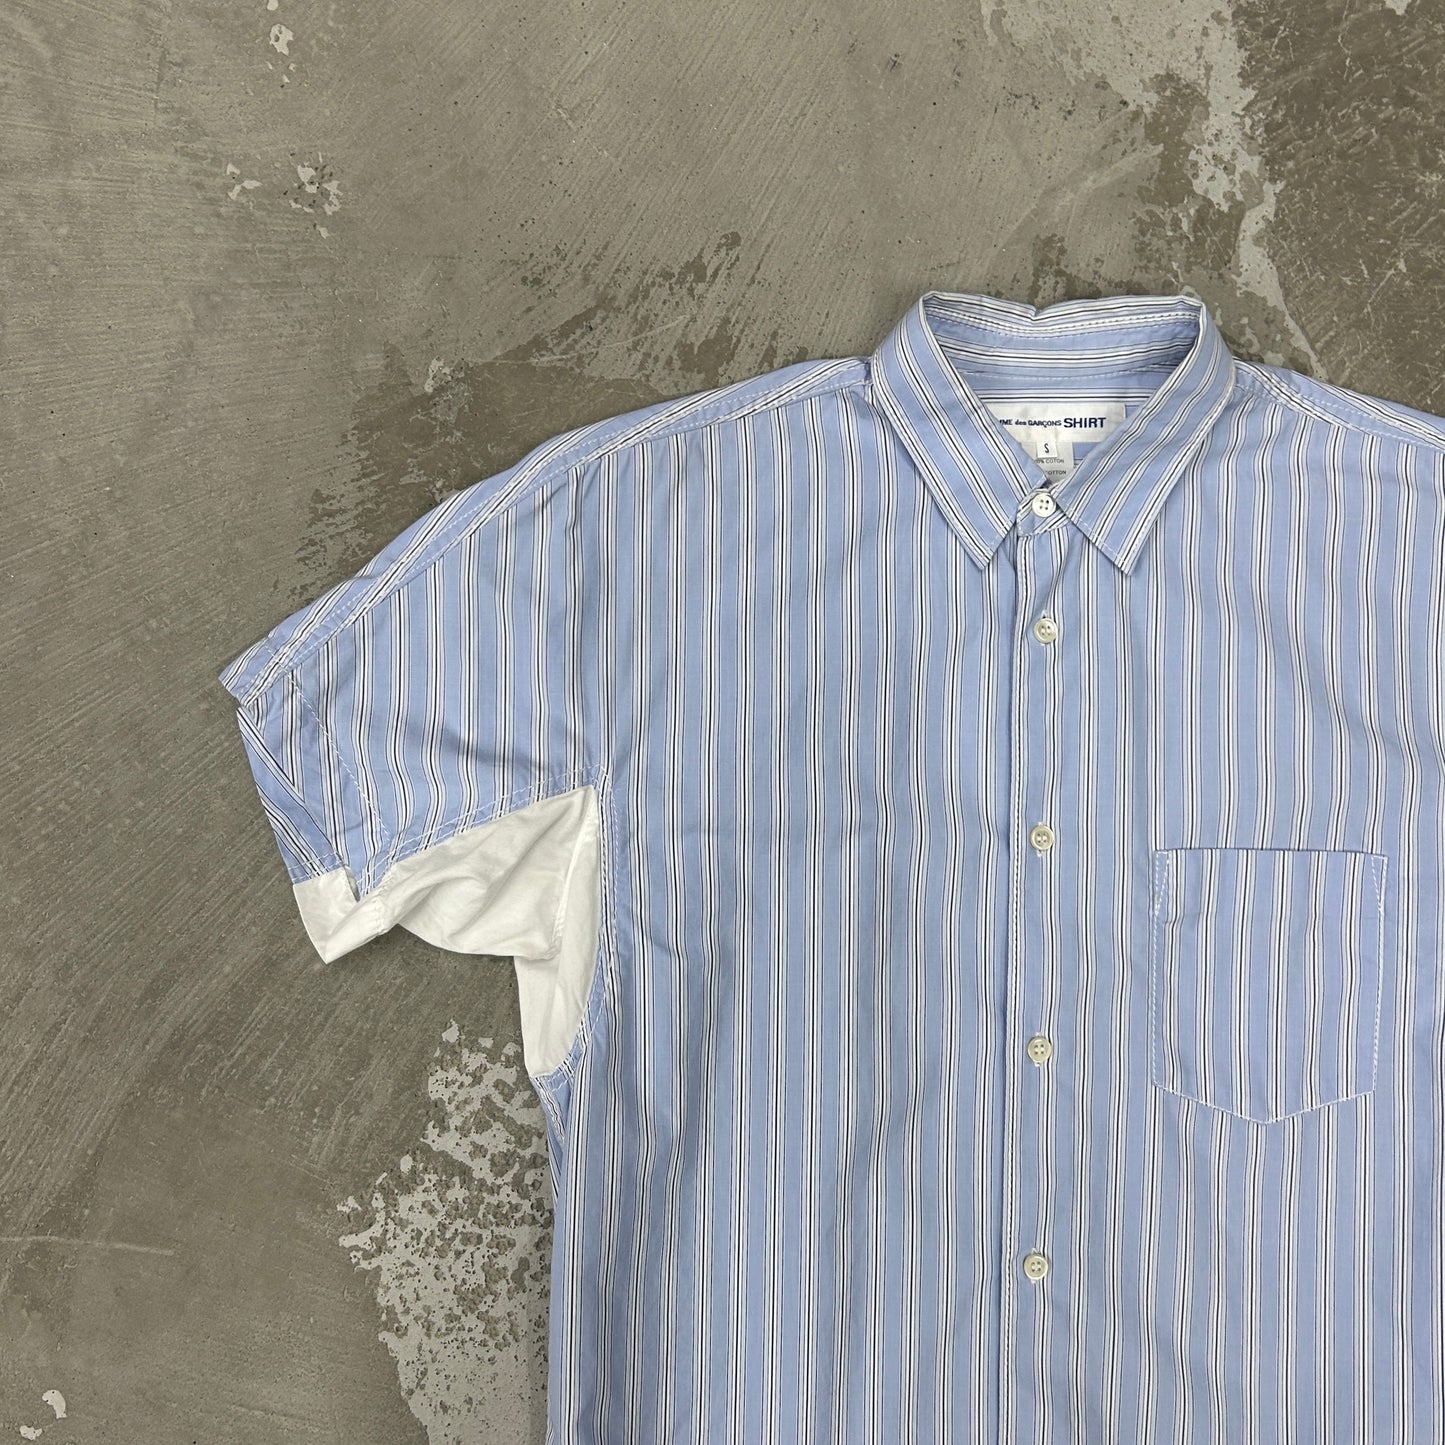 Comme des Garcons SHIRT Grown on Sleeve Shirt-Size S